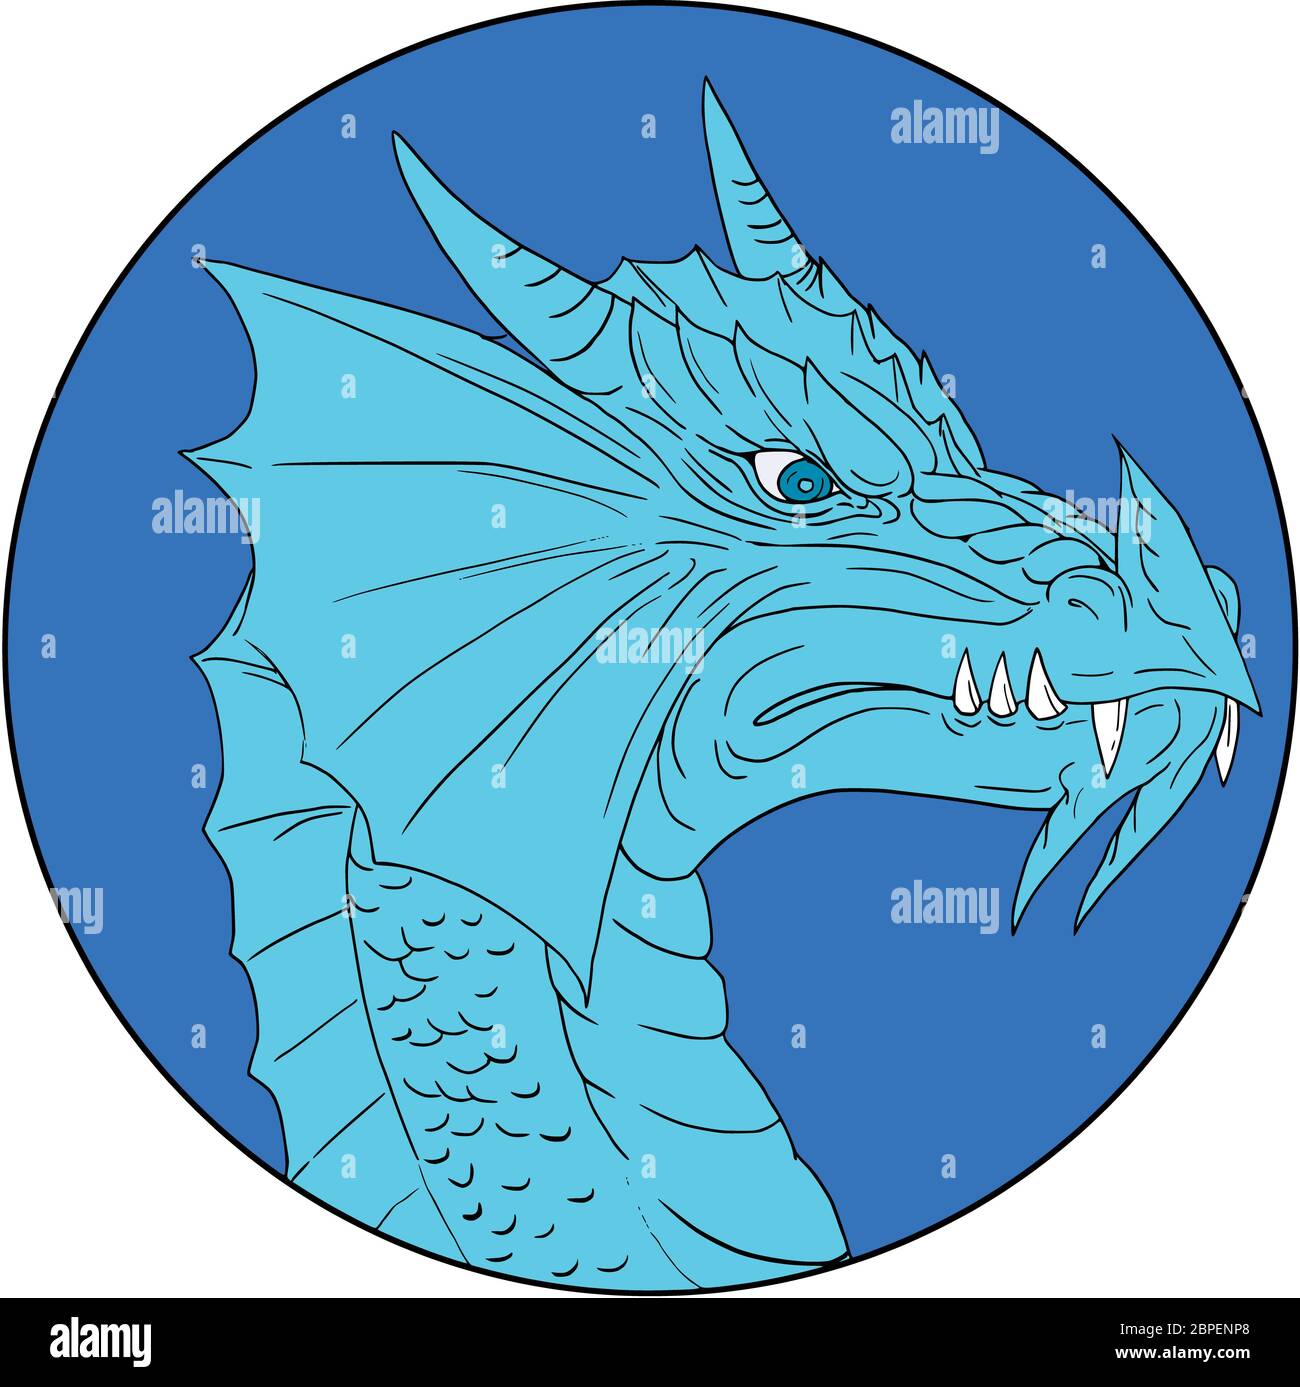 Drawing sketch style illustration of a head of an angry blue dragon viewed from the side set inside circle on isolated background. Stock Photo